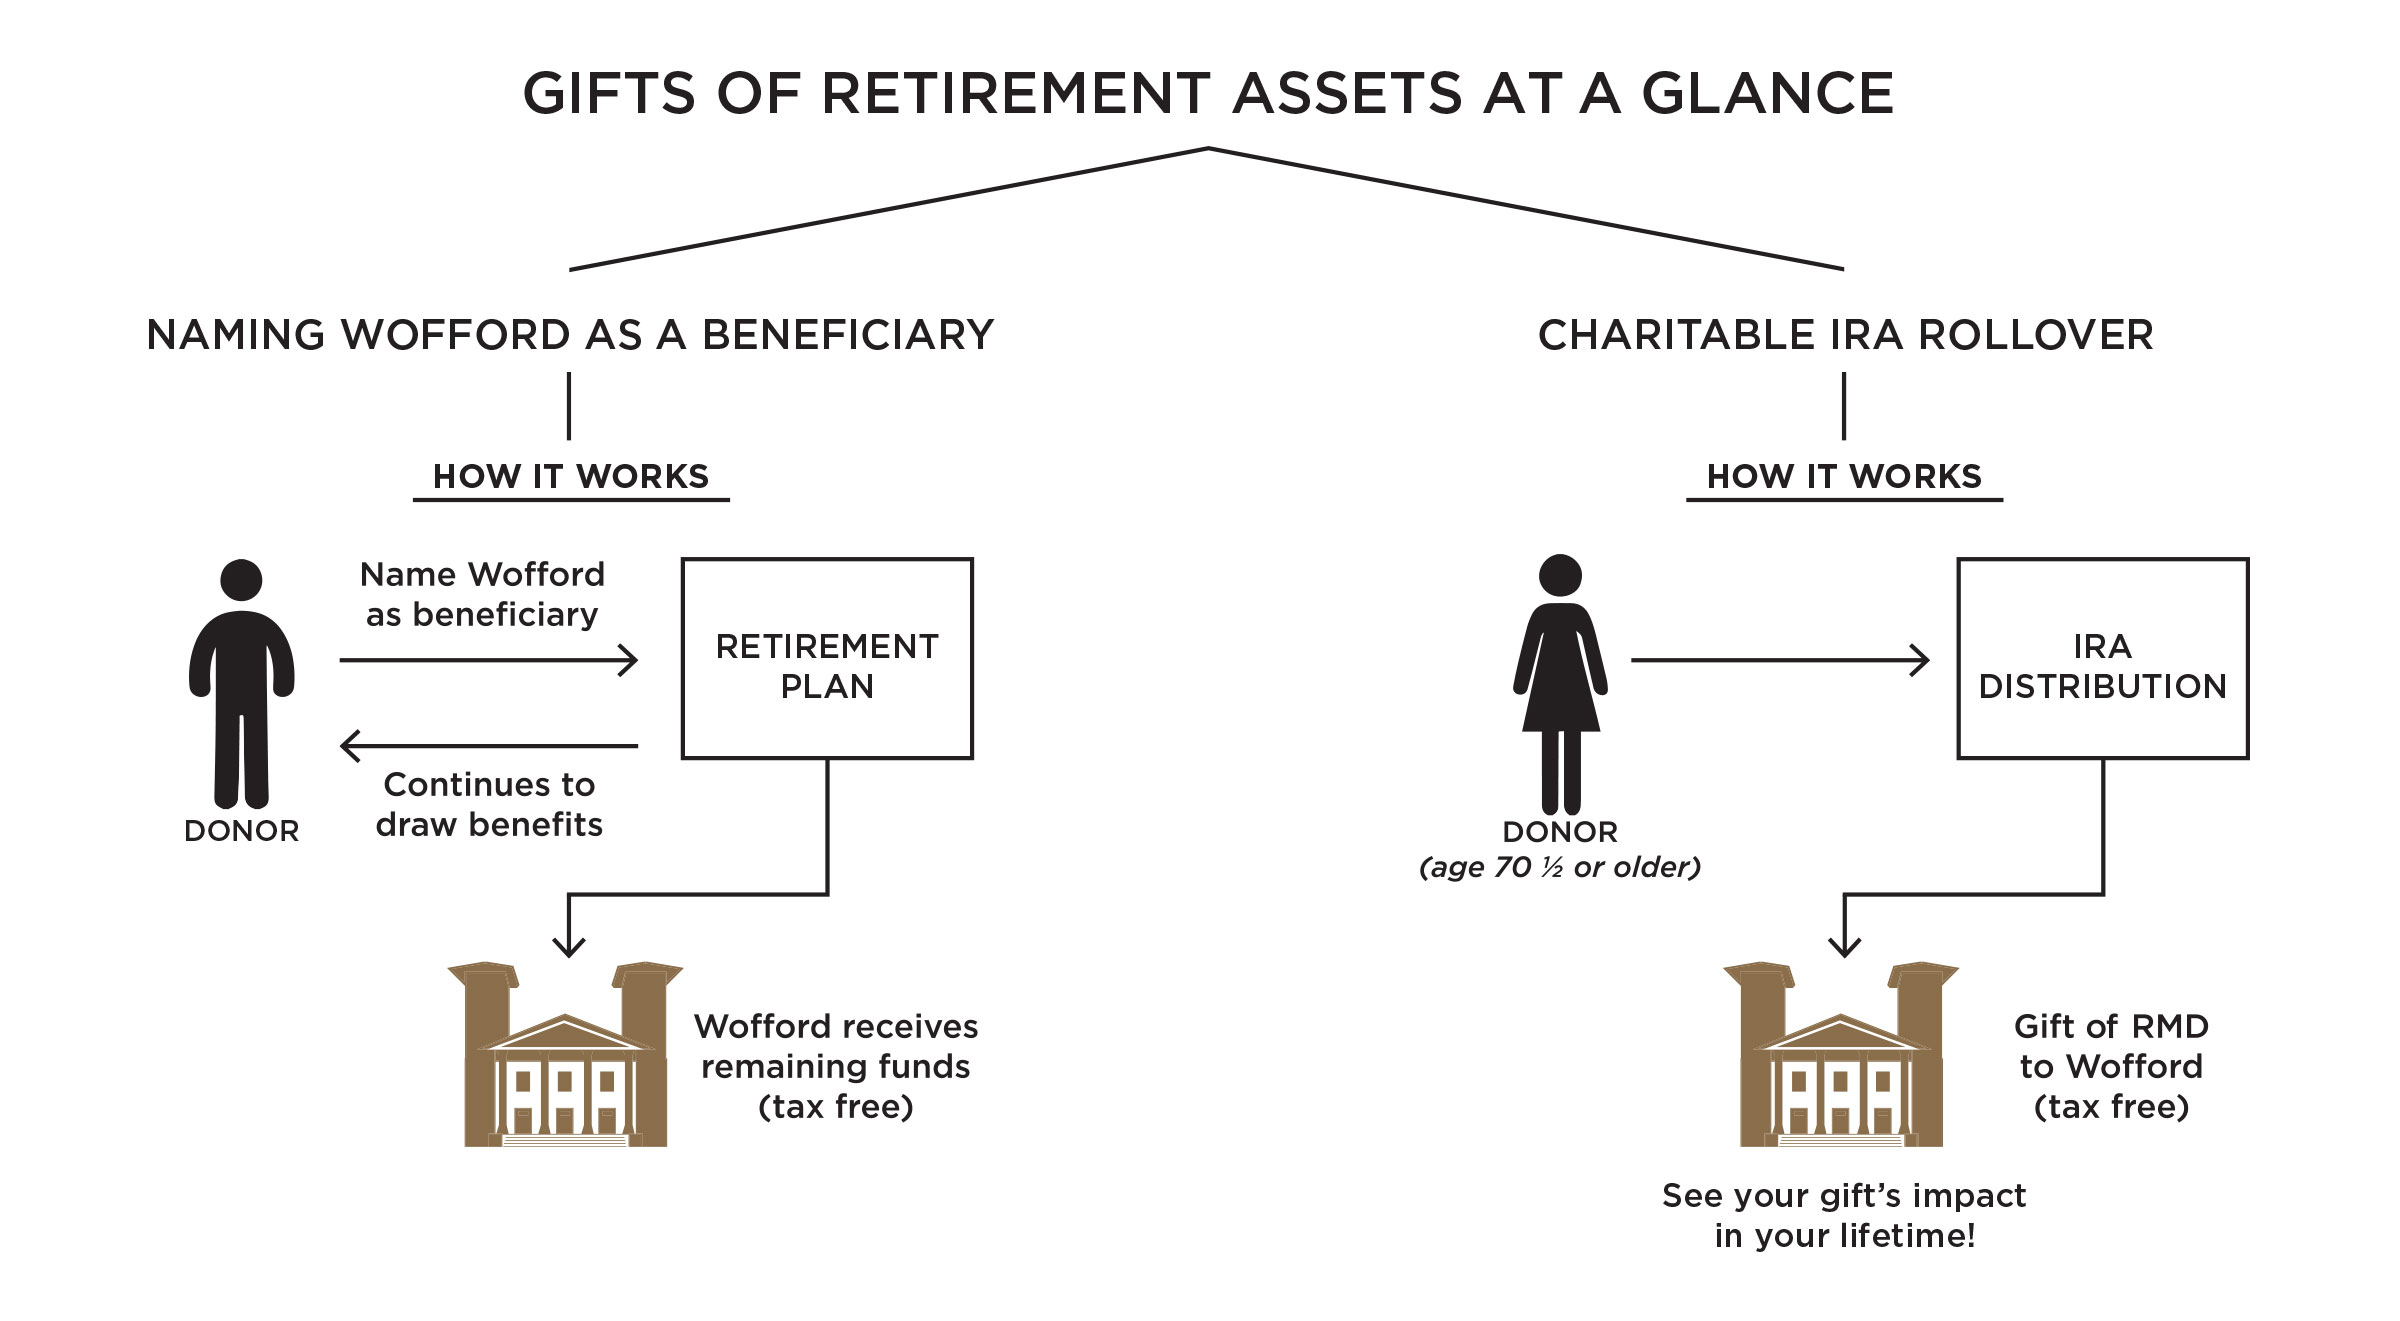 Retirement assets at a glance